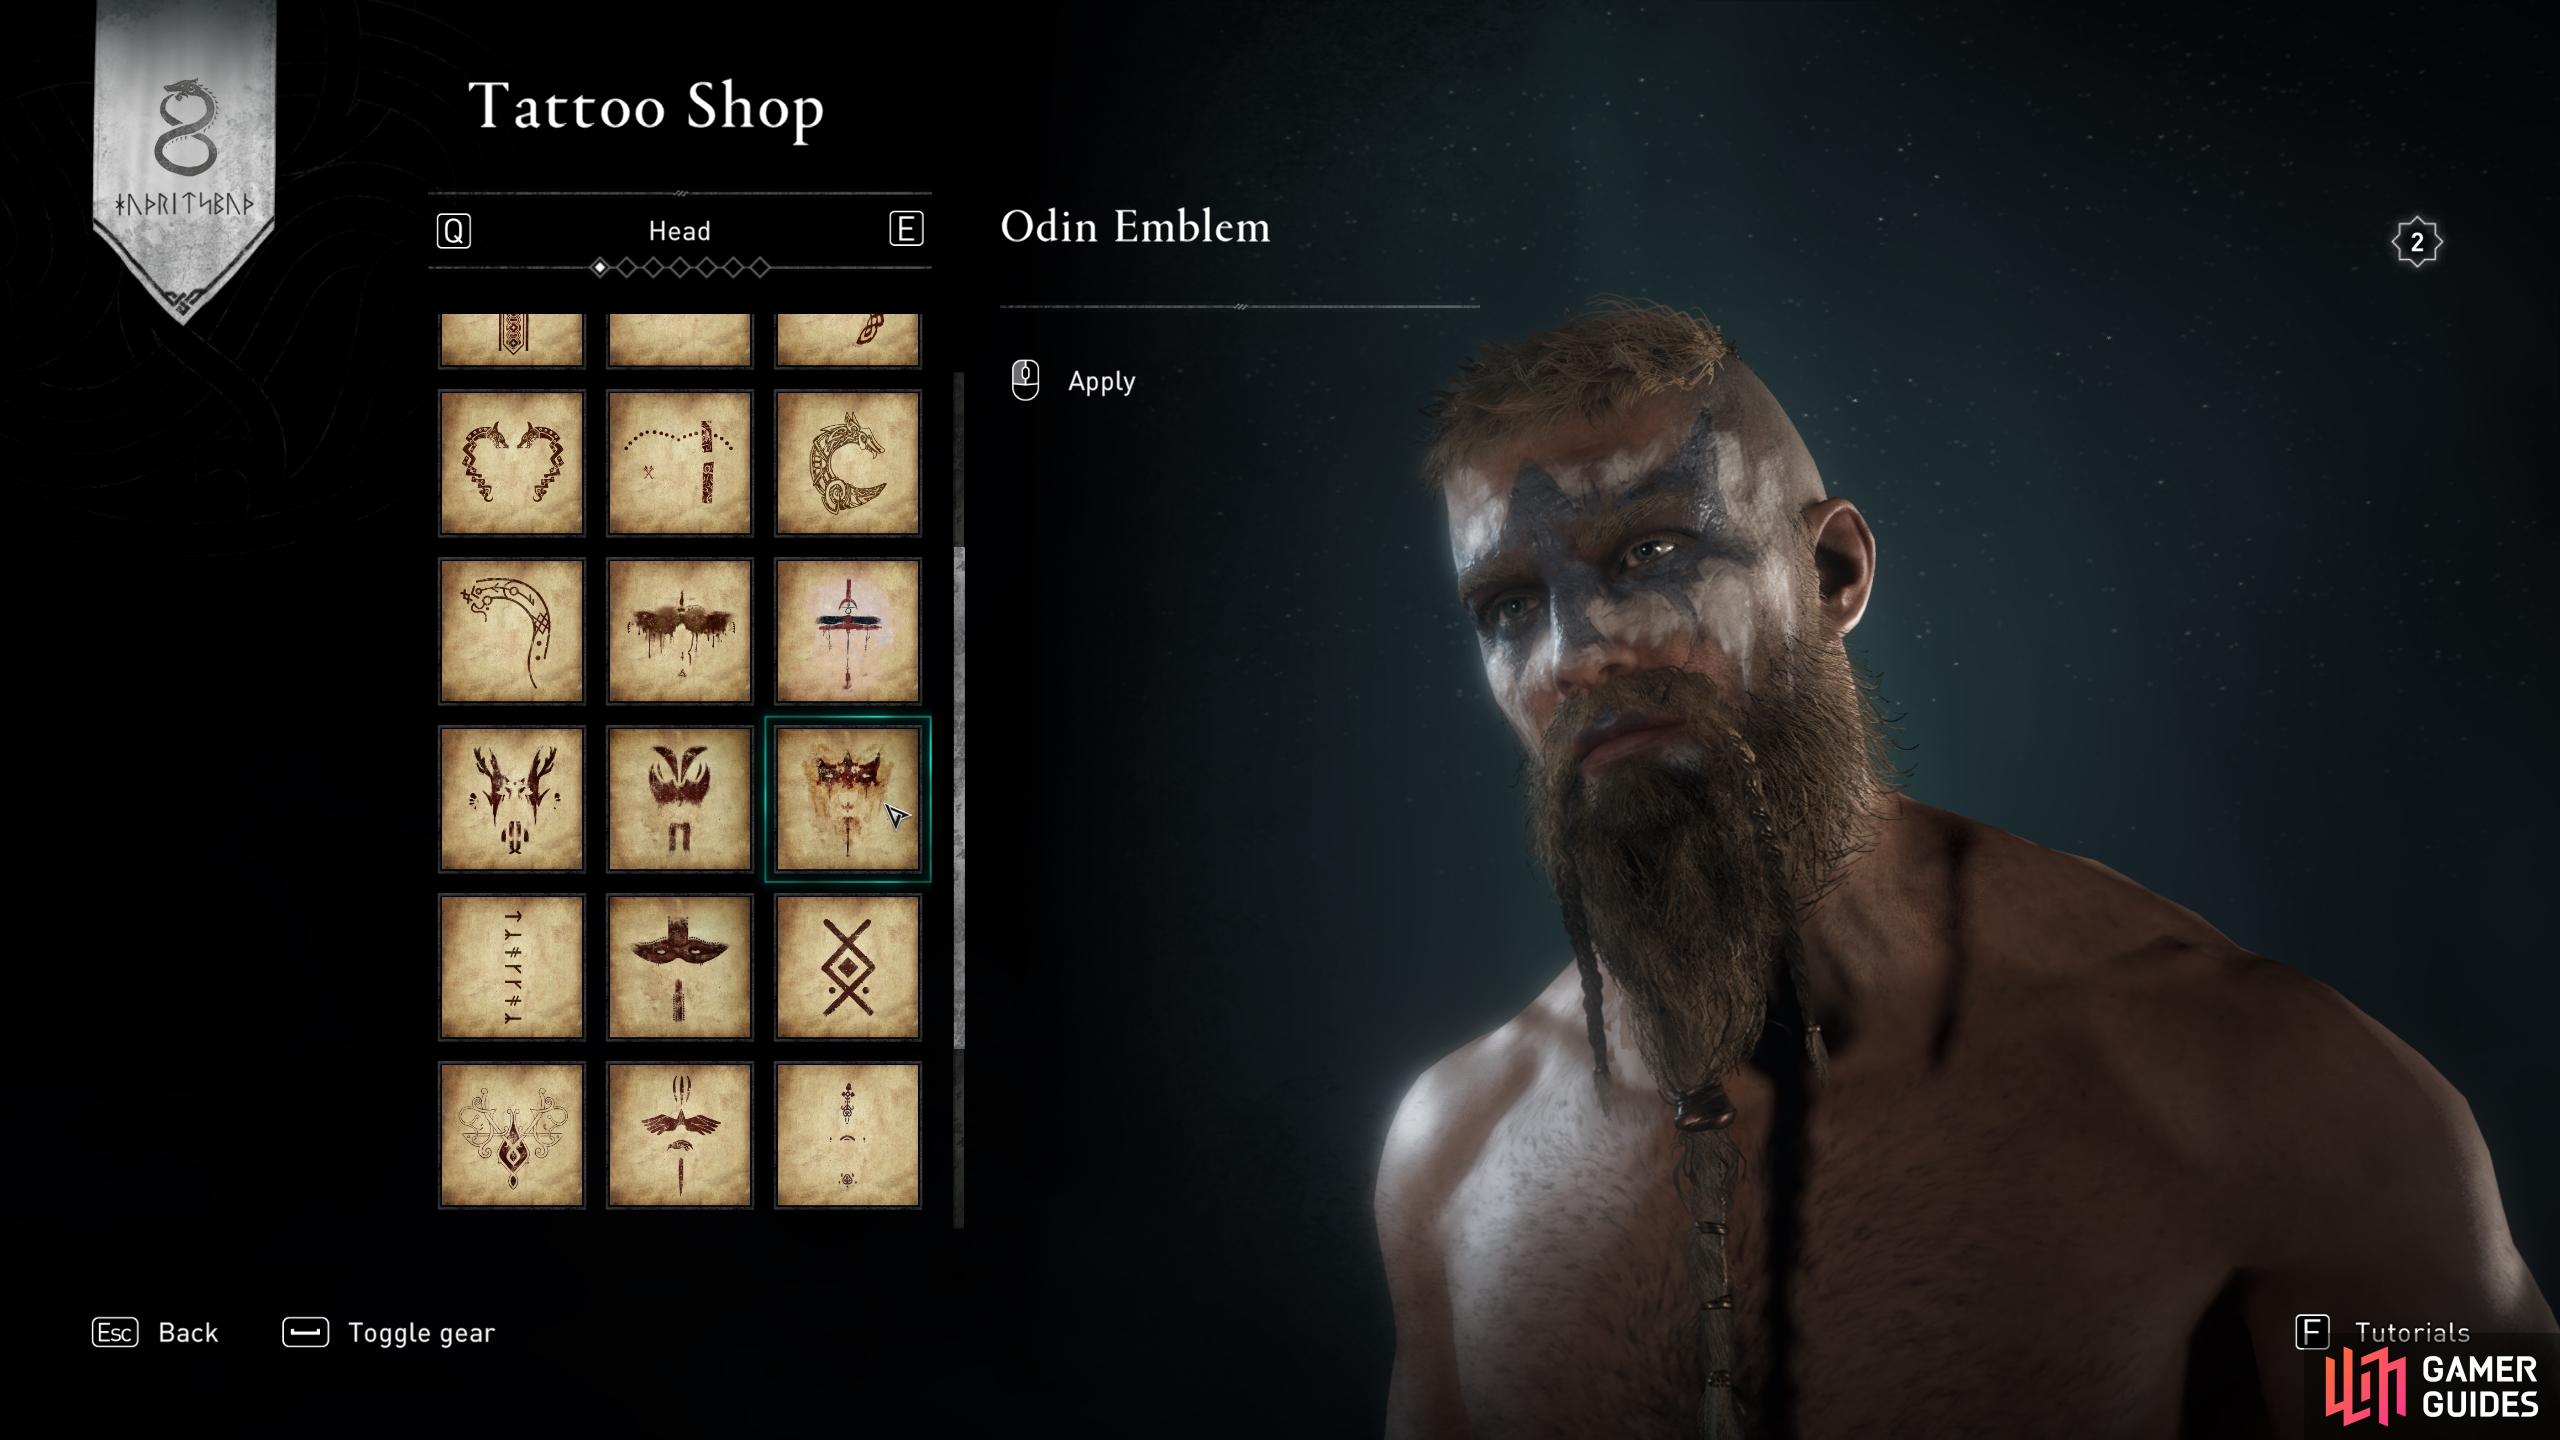 You can apply any tattoo and remove it again after the quest if you wish.